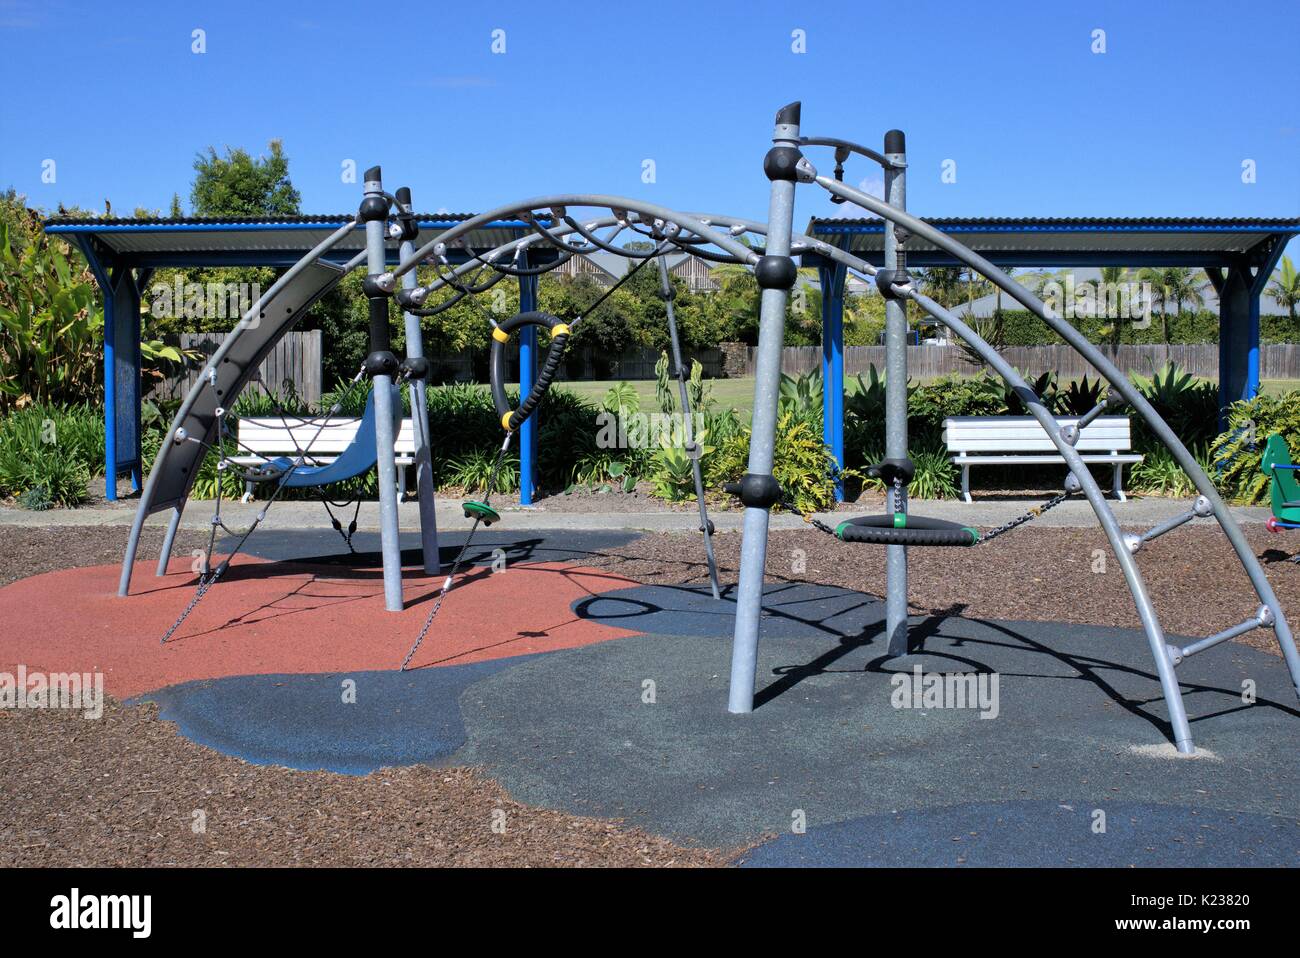 Ride made of ropes and metal for children at park. Stock Photo